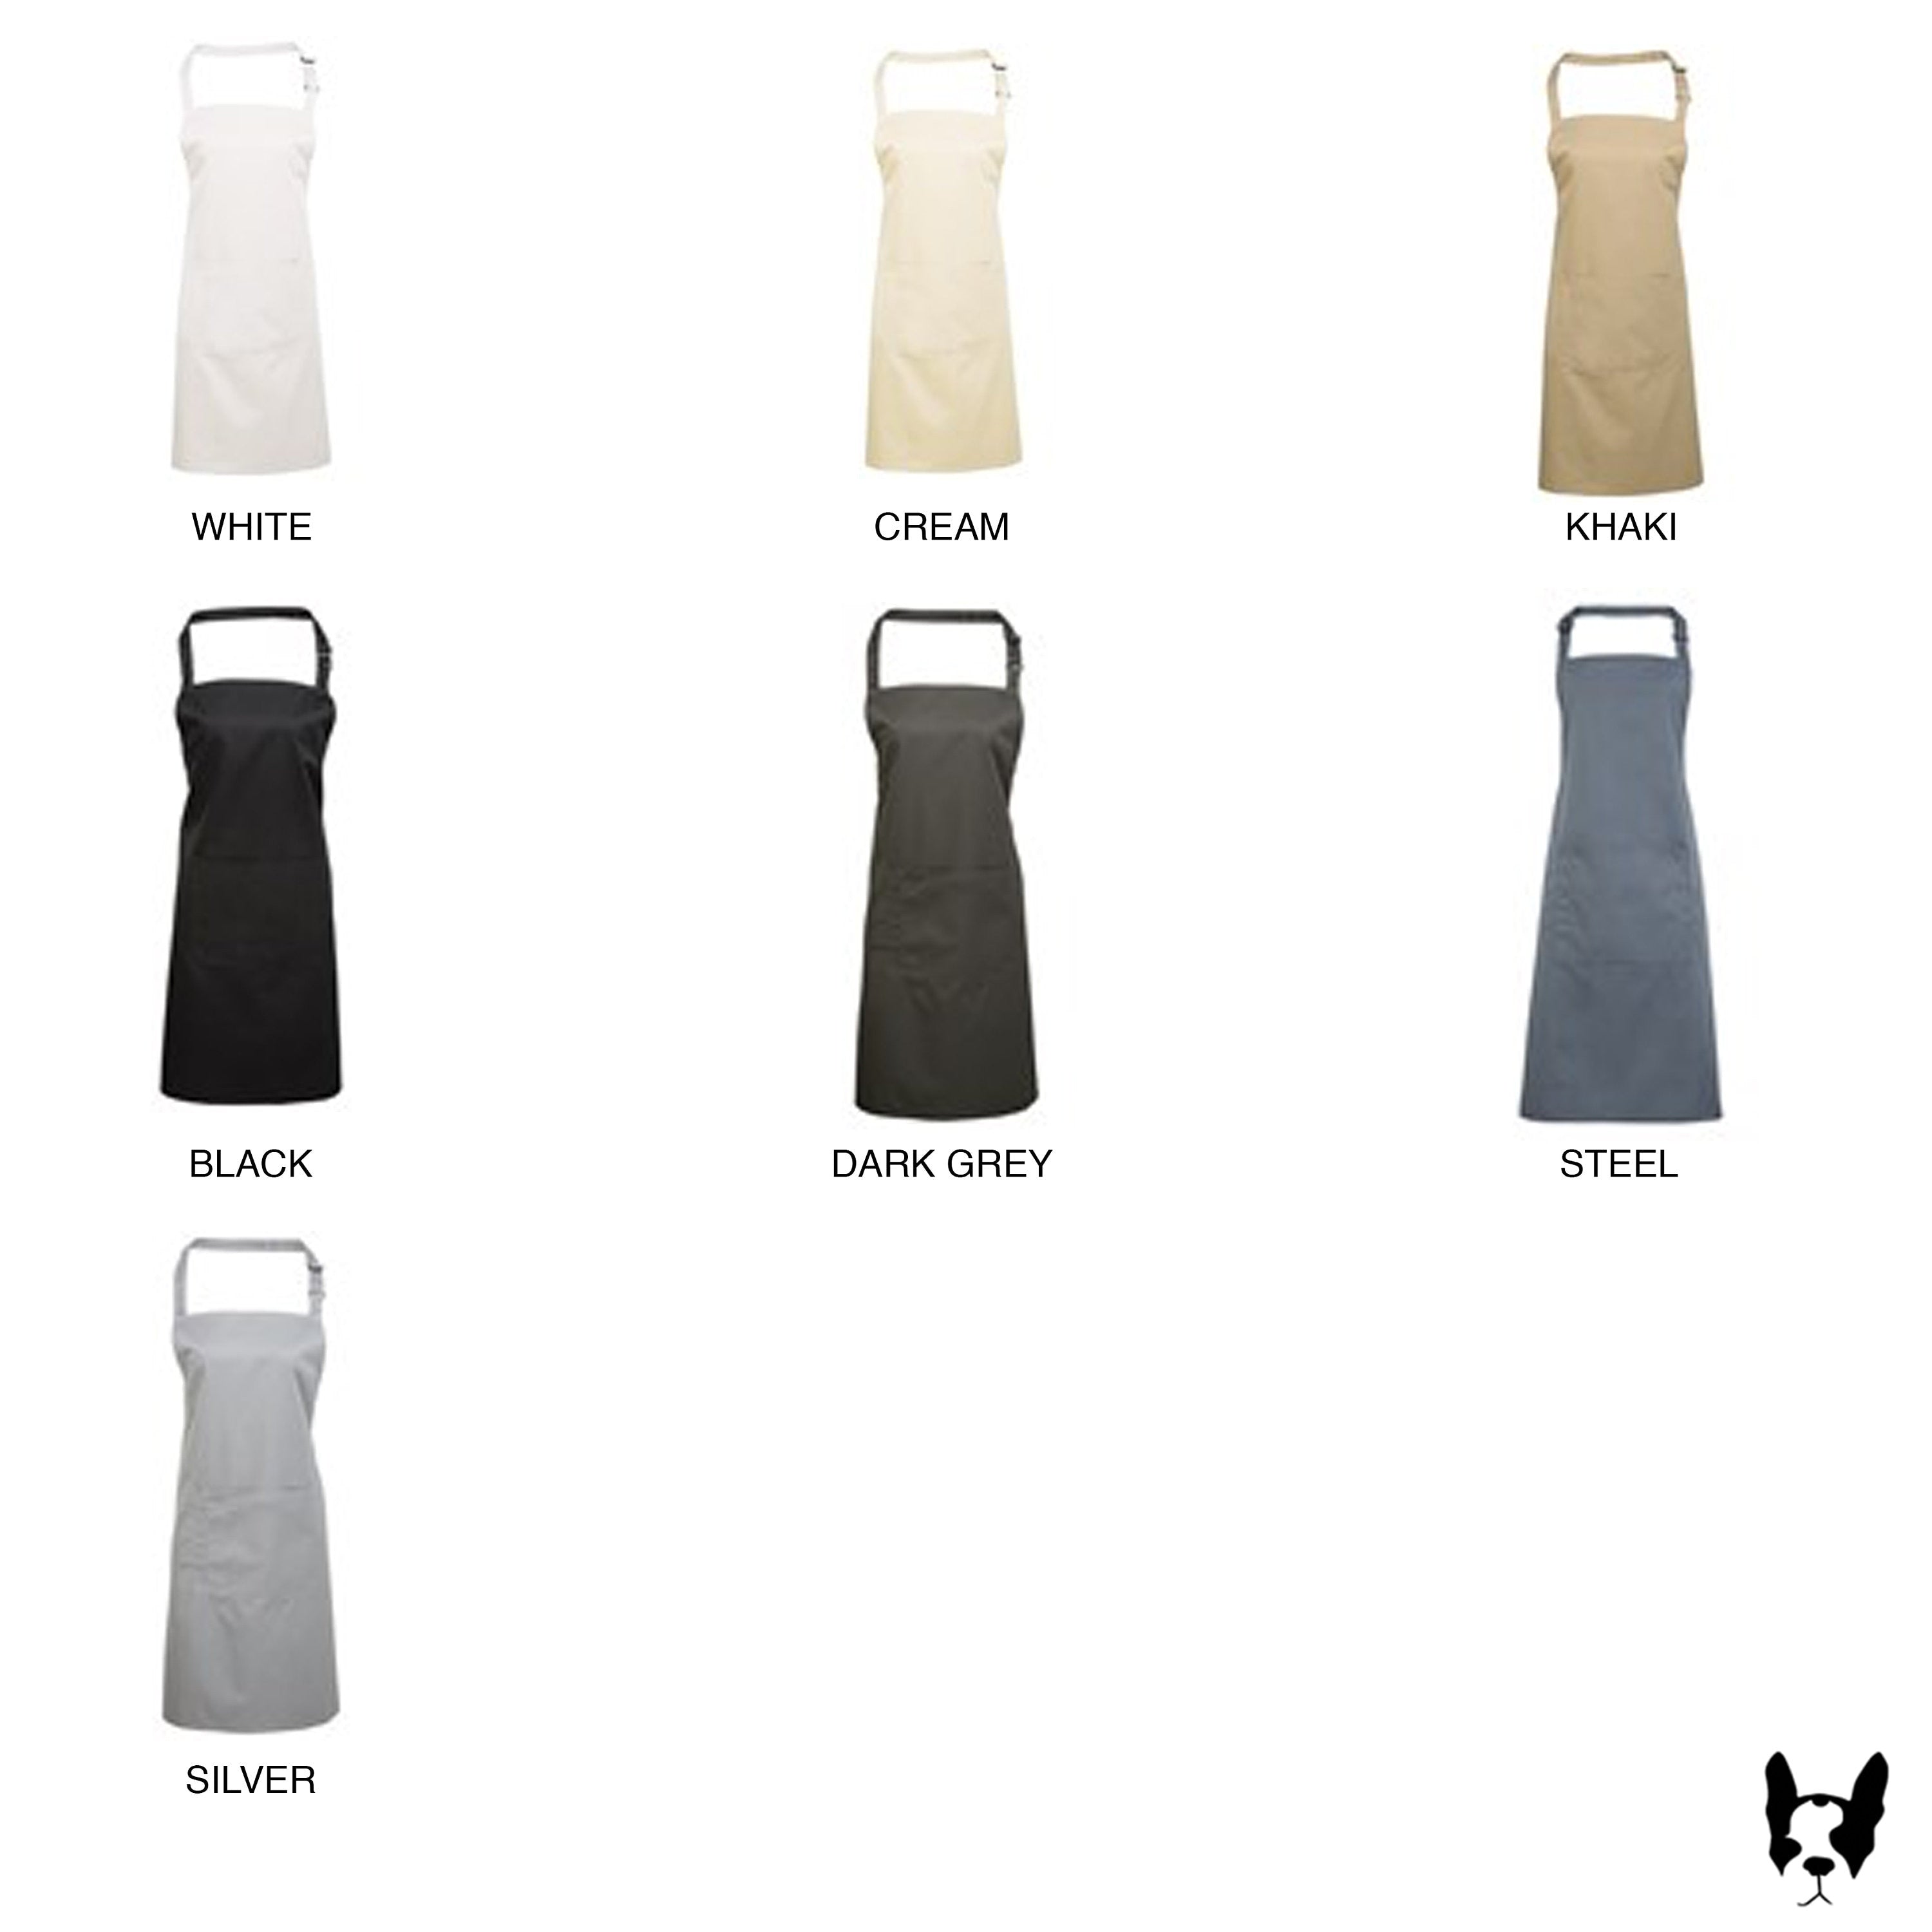 Stylish apron gift in various colors! Elevate kitchen fashion with options like classic black, vibrant red, calming blue, and more. Perfect for personalizing culinary experiences. Choose the perfect shade for your loved one&#39;s cooking style.